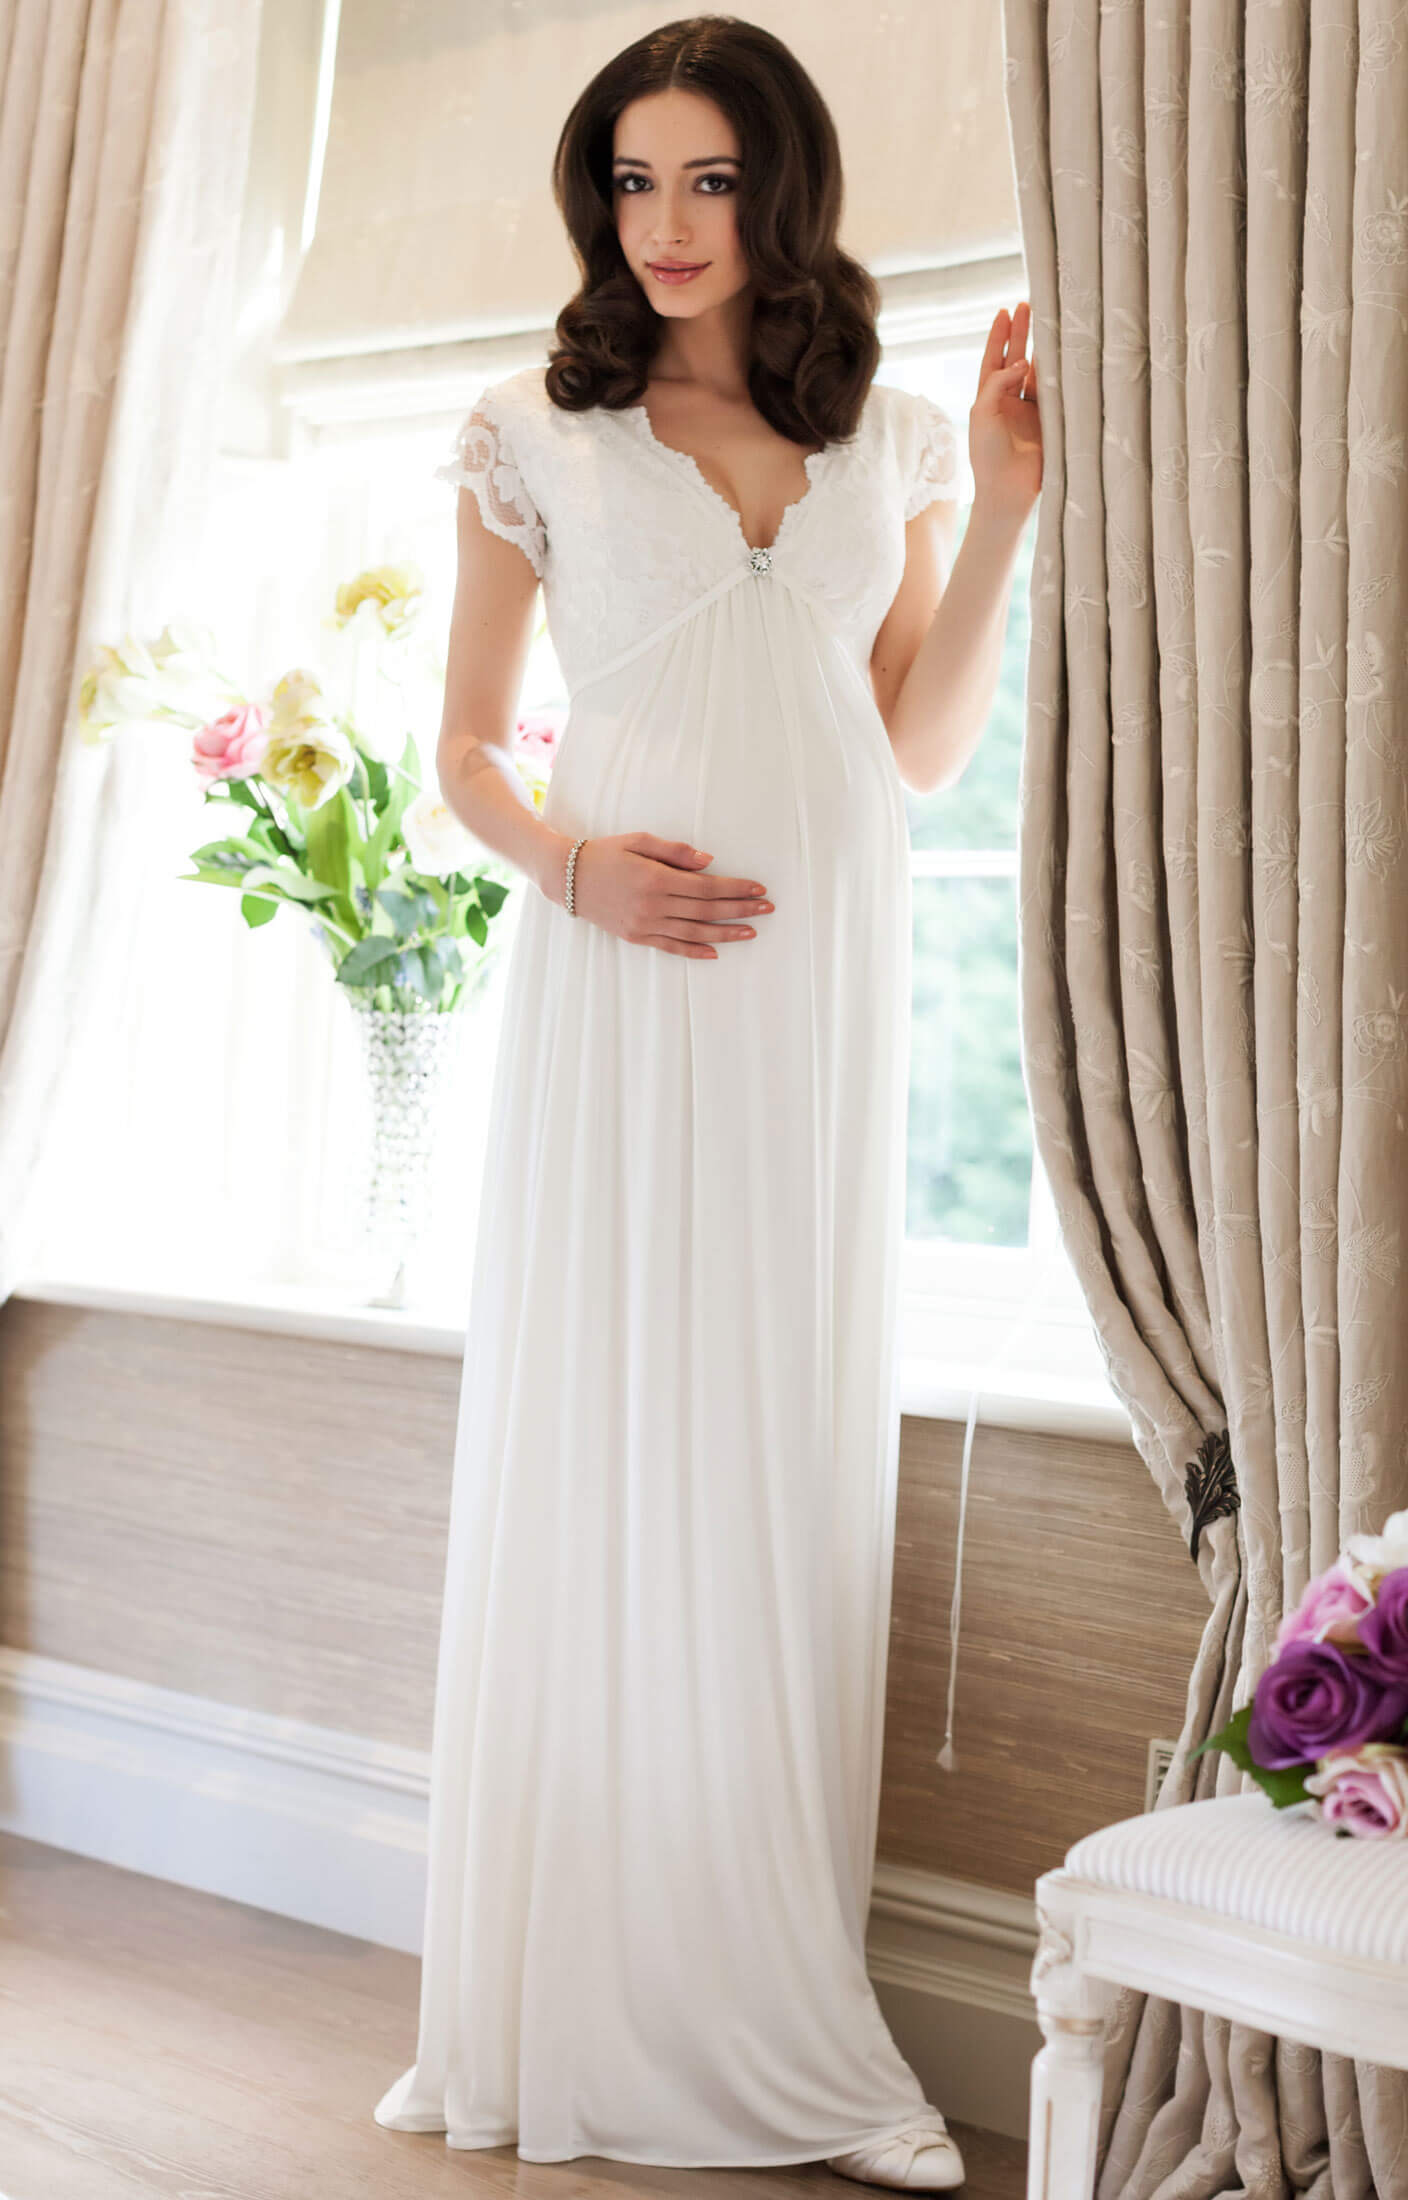 Sevilla Maternity Wedding Gown Long Ivory Maternity Wedding Dresses Evening Wear And Party 